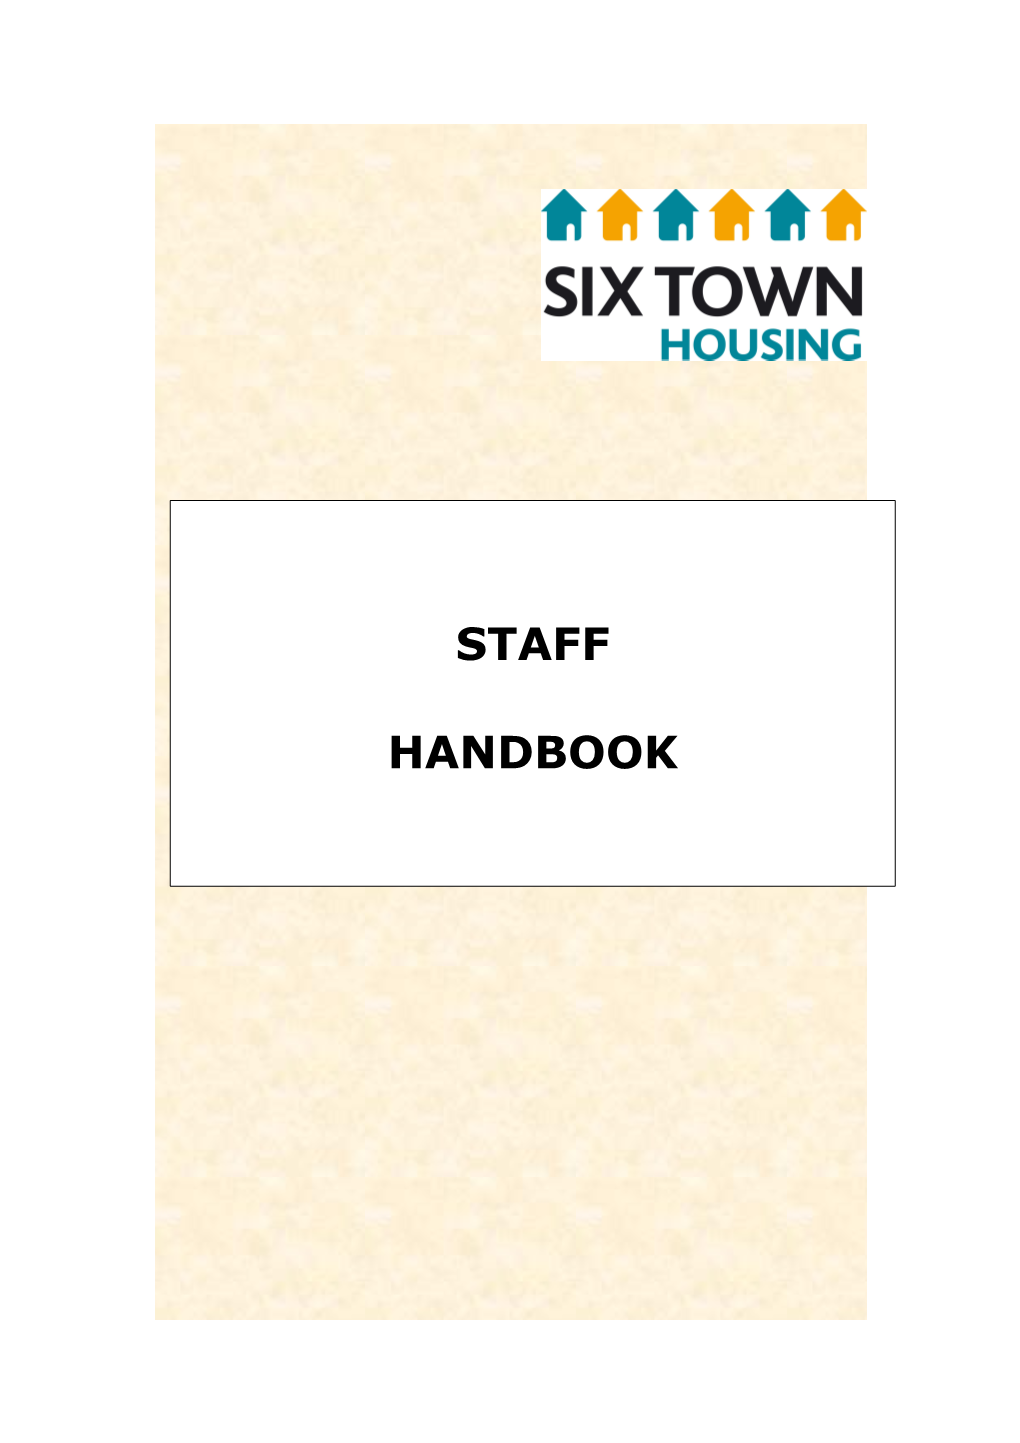 This Staff Handbook Has Been Produced to Assist You As Part of Your Induction and As A